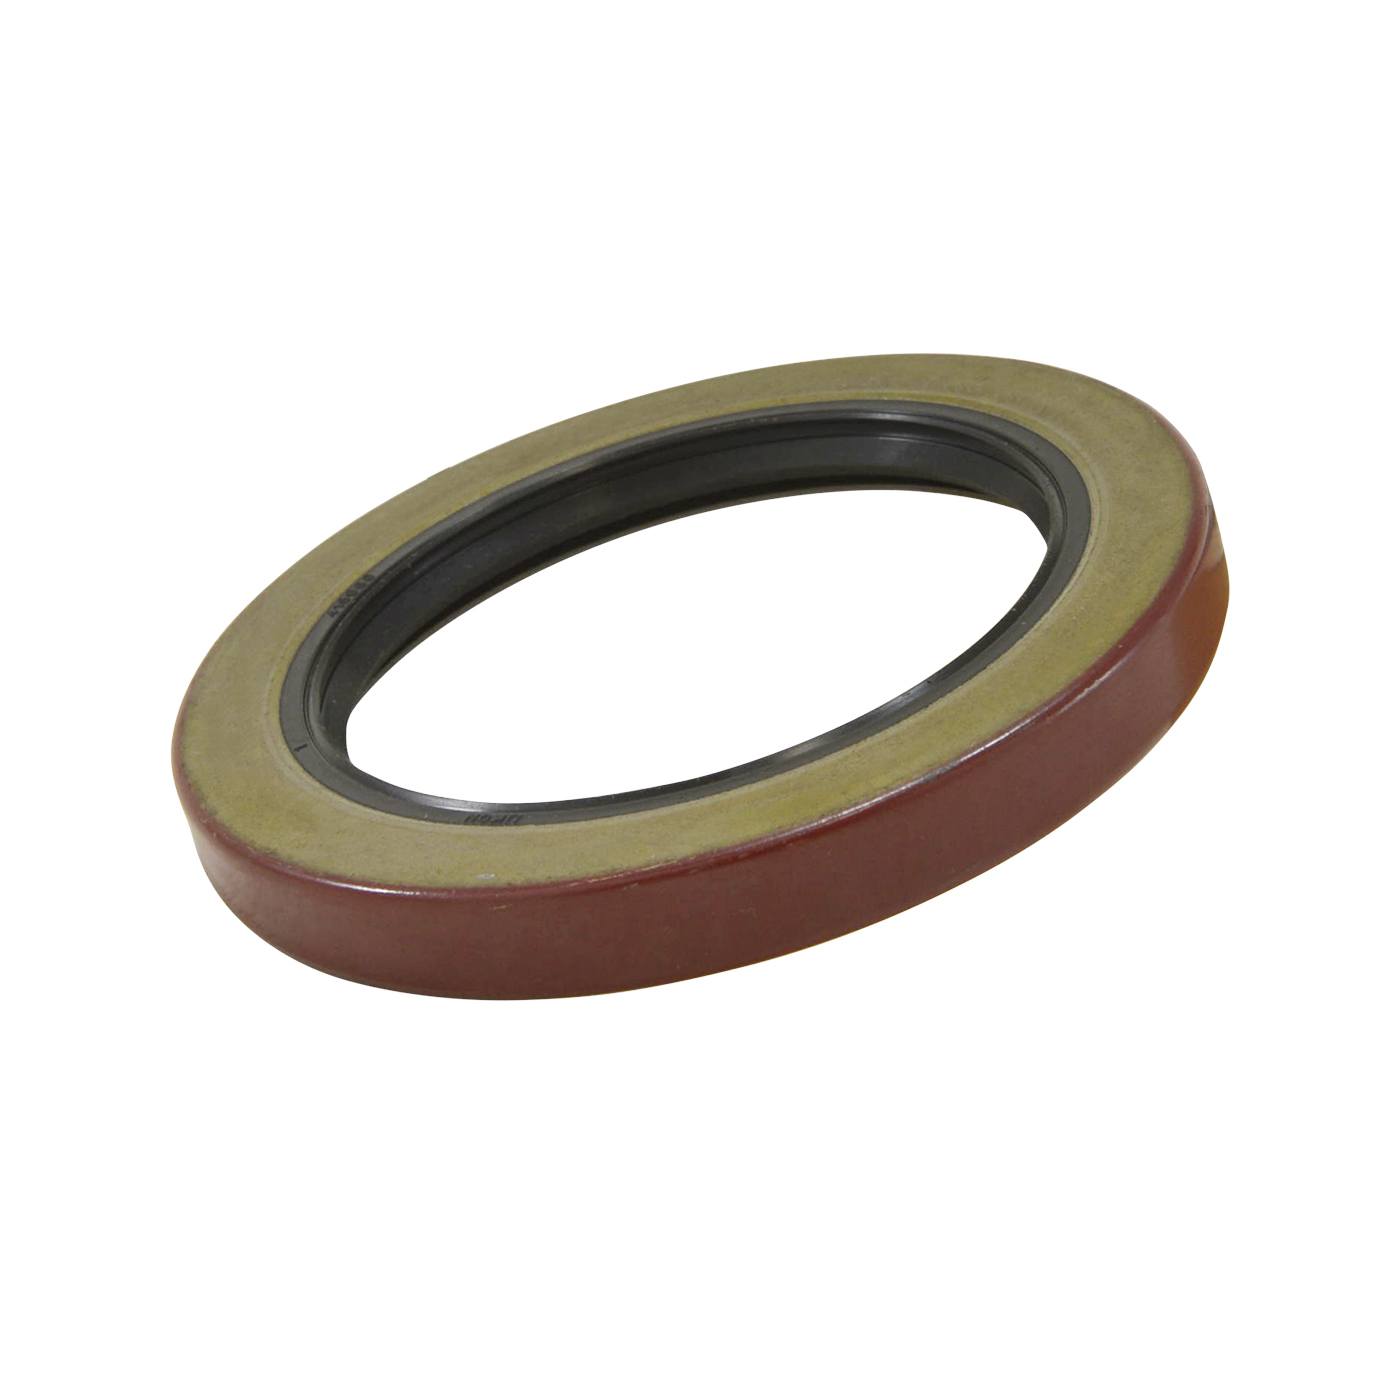 Replacement wheel seal for '80-'93 Dana 60 Dodge 